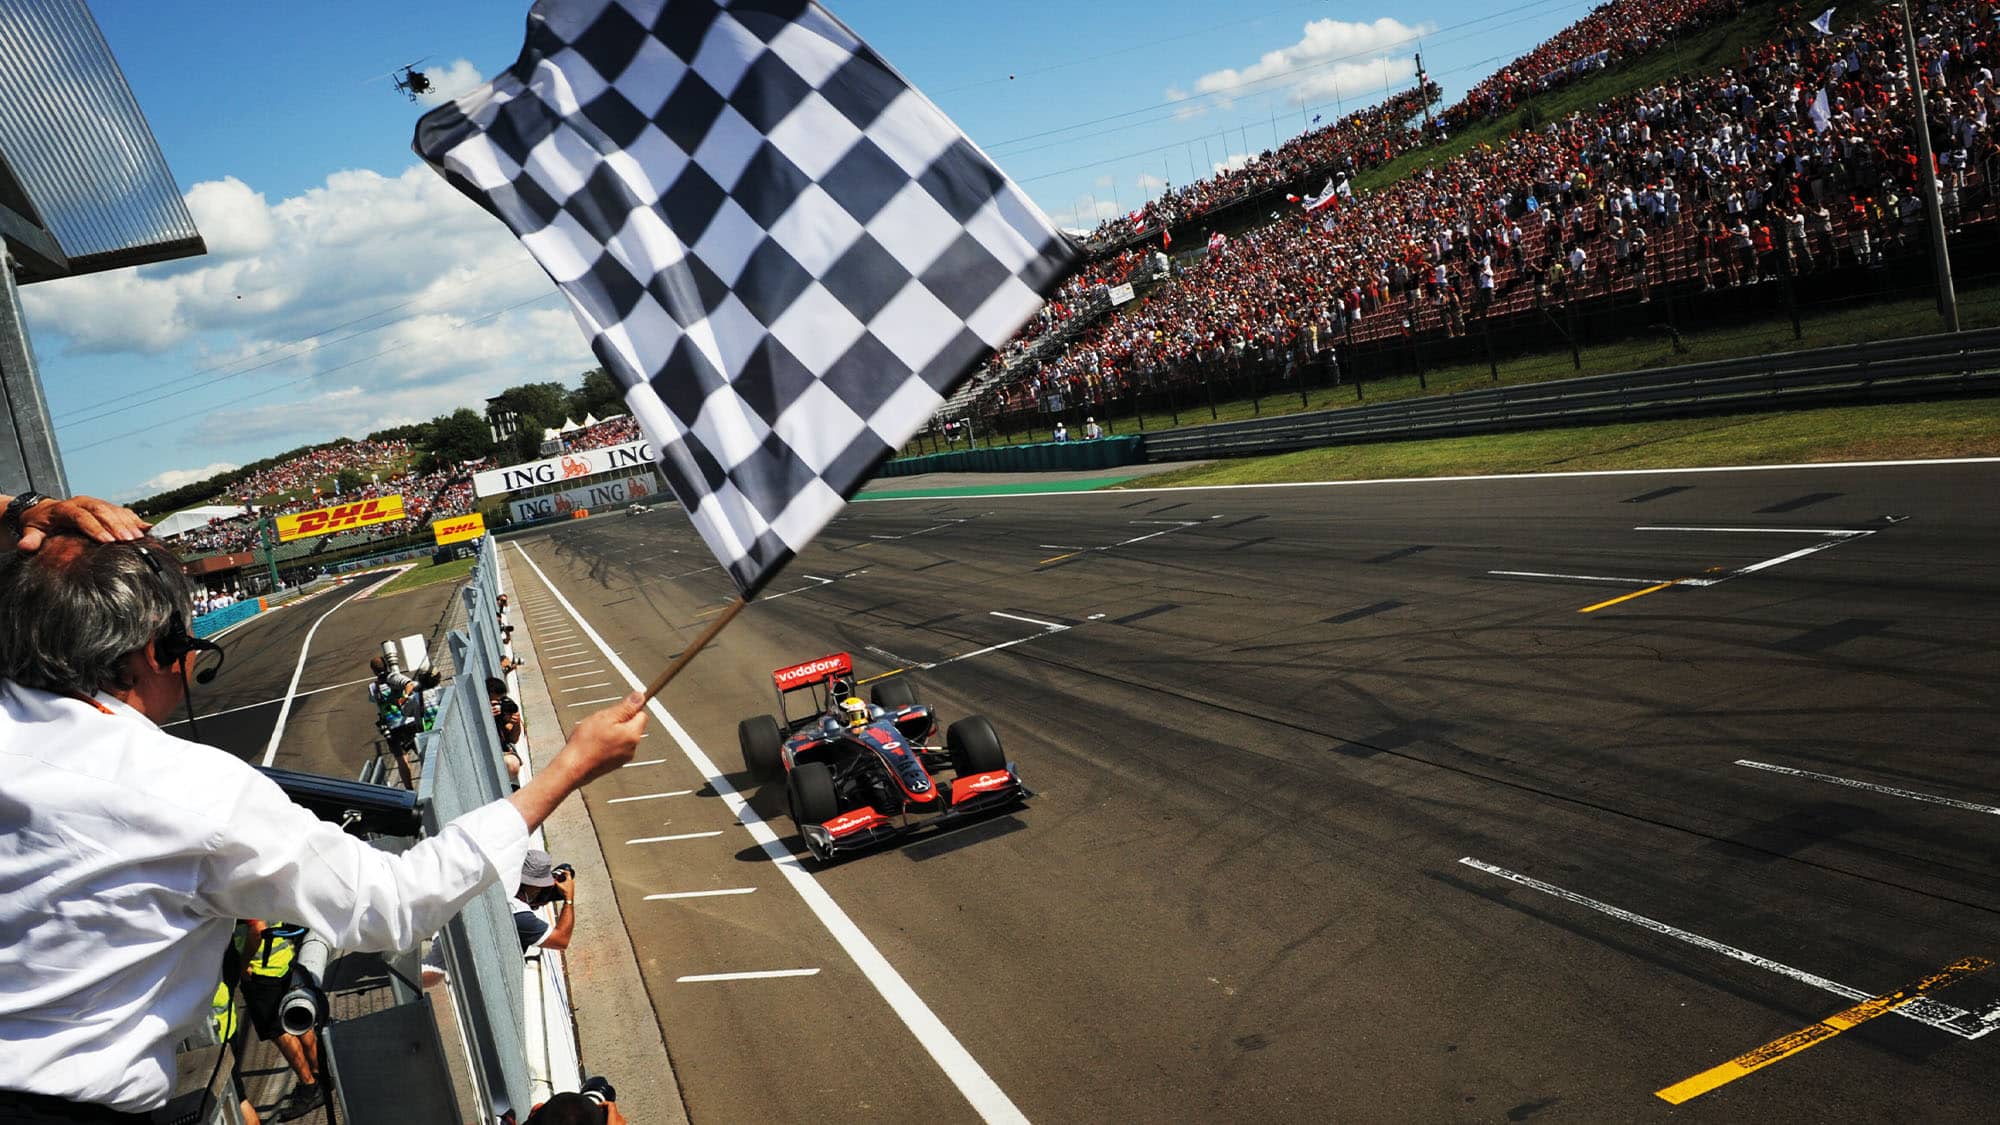 Lewis Hamilton drives past the chequered flag to win the 2009 Hungarian Grand Prix